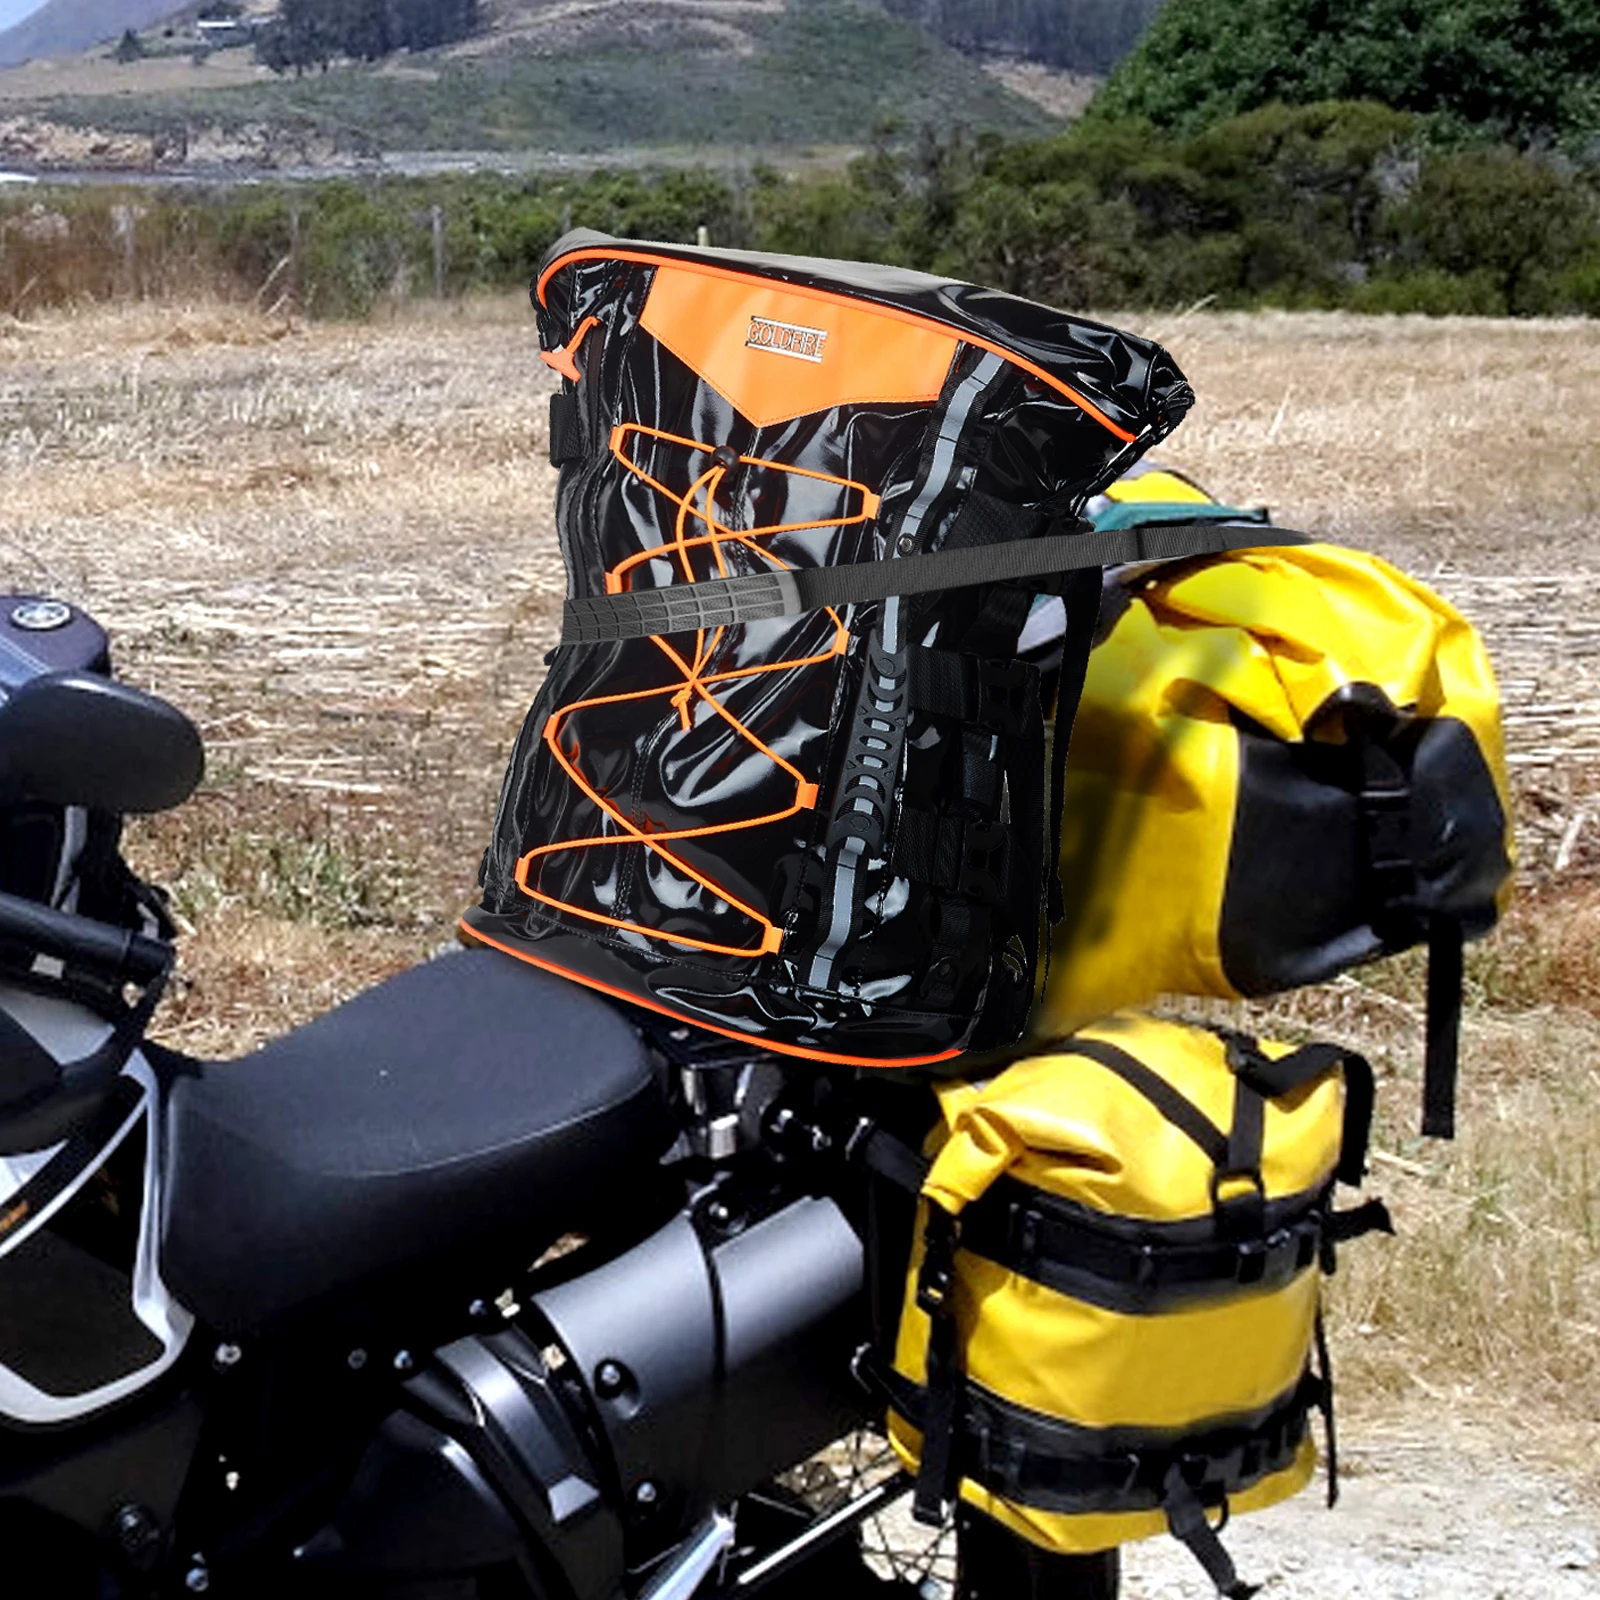 Expandable Multifunctional Motorcycle Tail Bags Luggage Rack Bag Sissy bar Bag Travel Luggage Backpack with Sissy Bar Straps